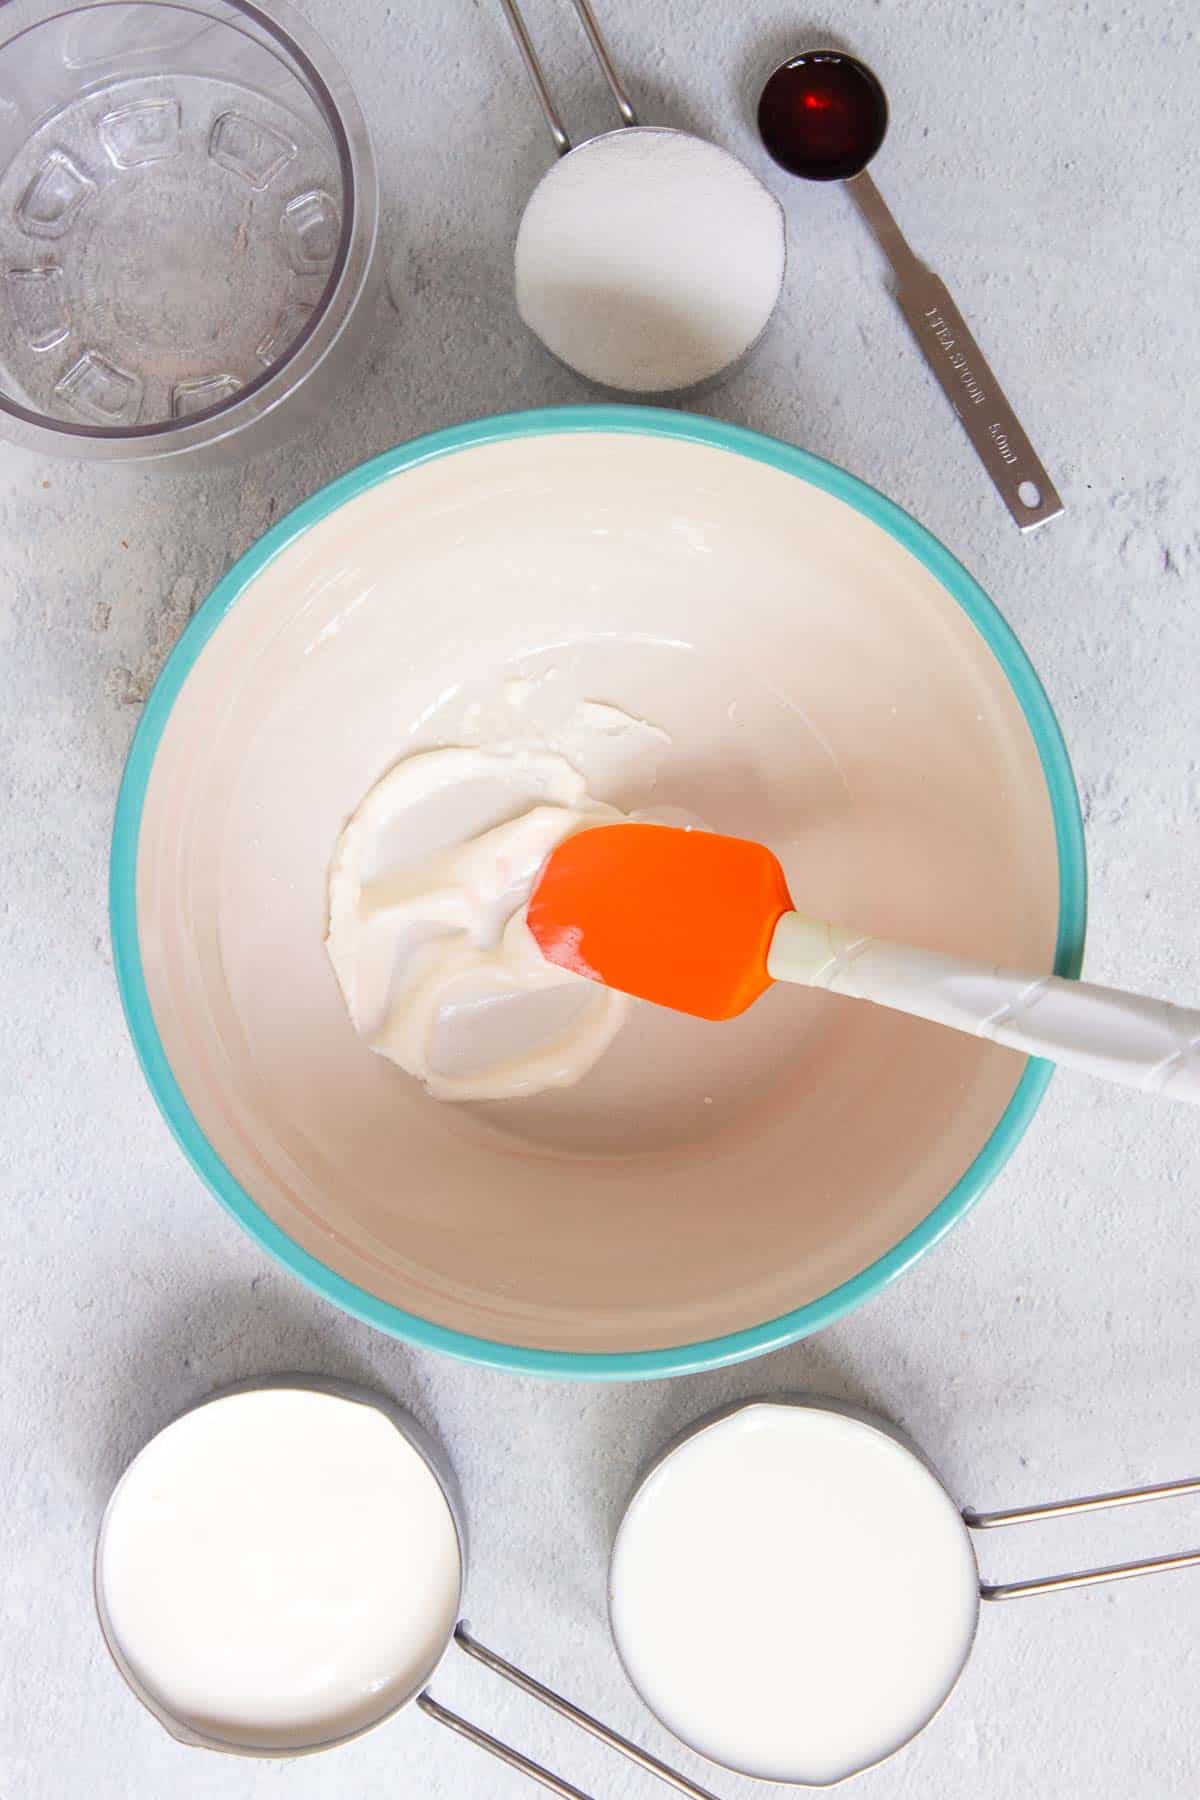 Cream cheese is softened in a large mixing bowl